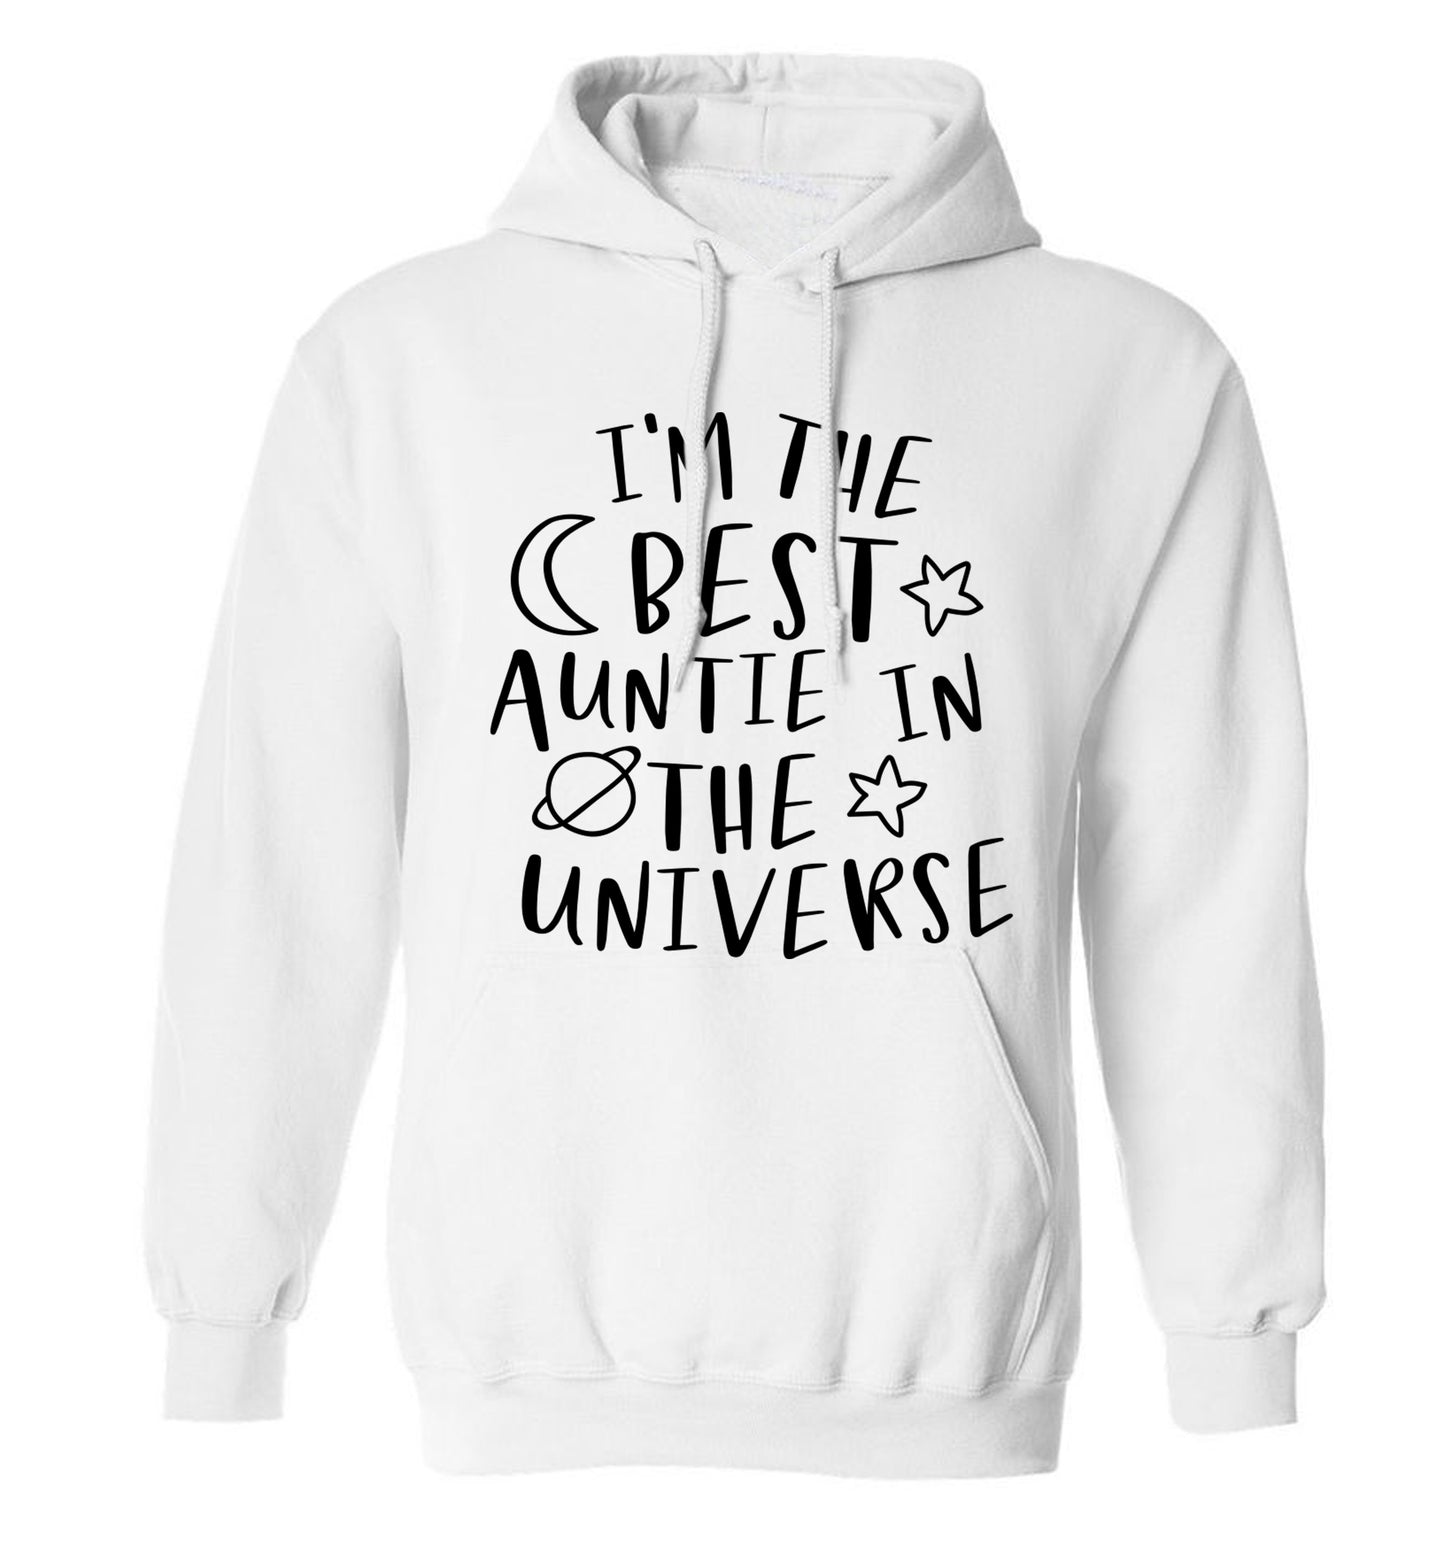 I'm the best auntie in the universe adults unisex white hoodie 2XL